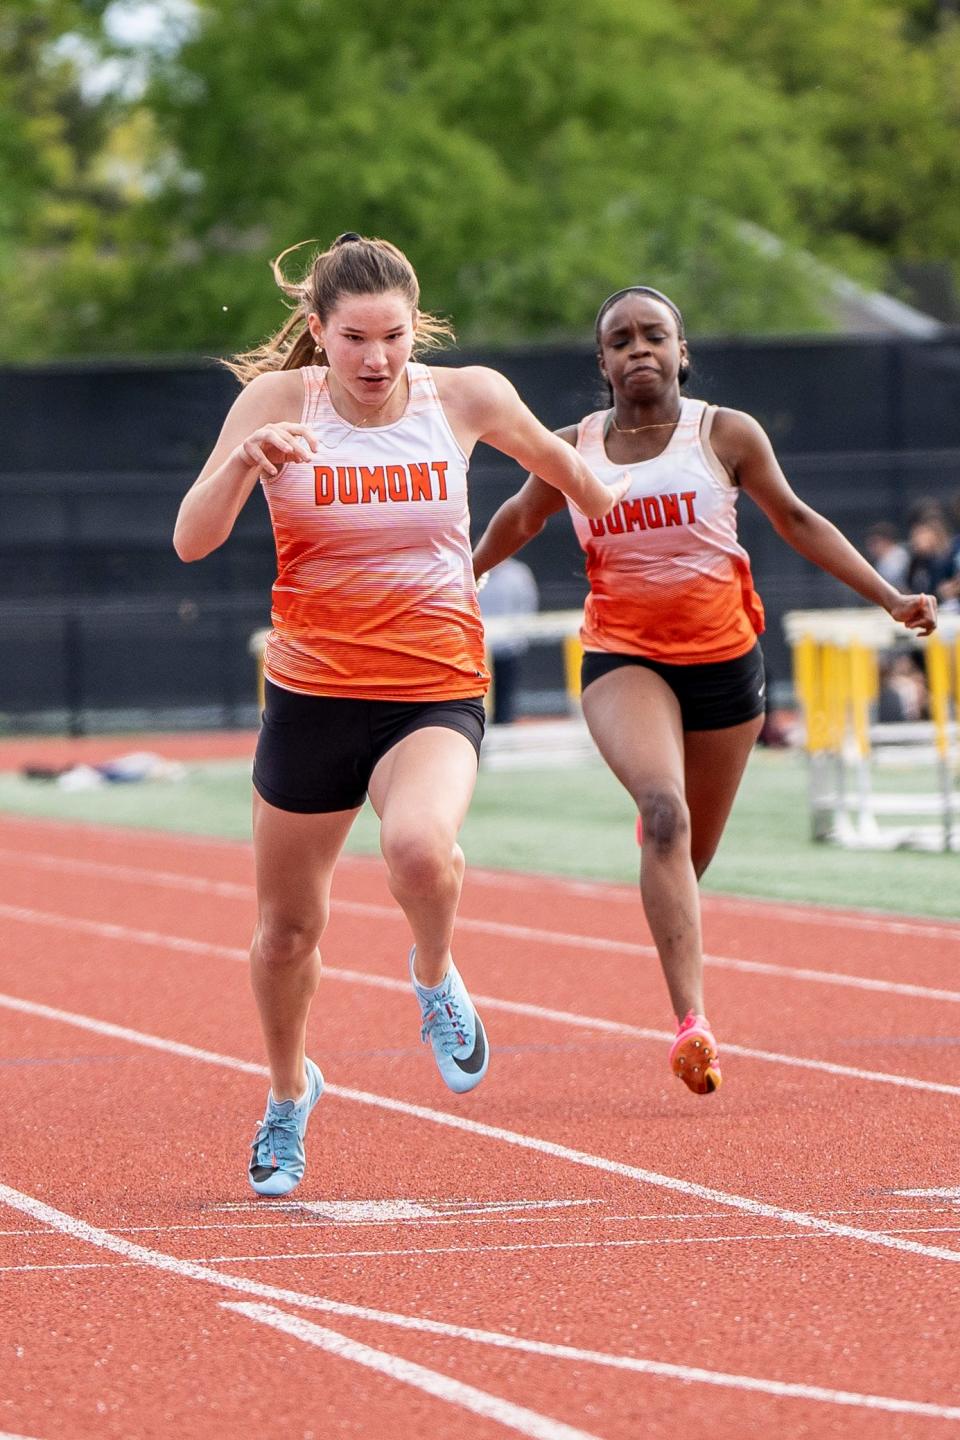 Jenna Monaco from Dumont finishes first in the American Division 100 meter dash. The Big North American and Patriot Division track and field championships take place at River Dell High School in Oradell, NJ on Friday, May 5, 2023.